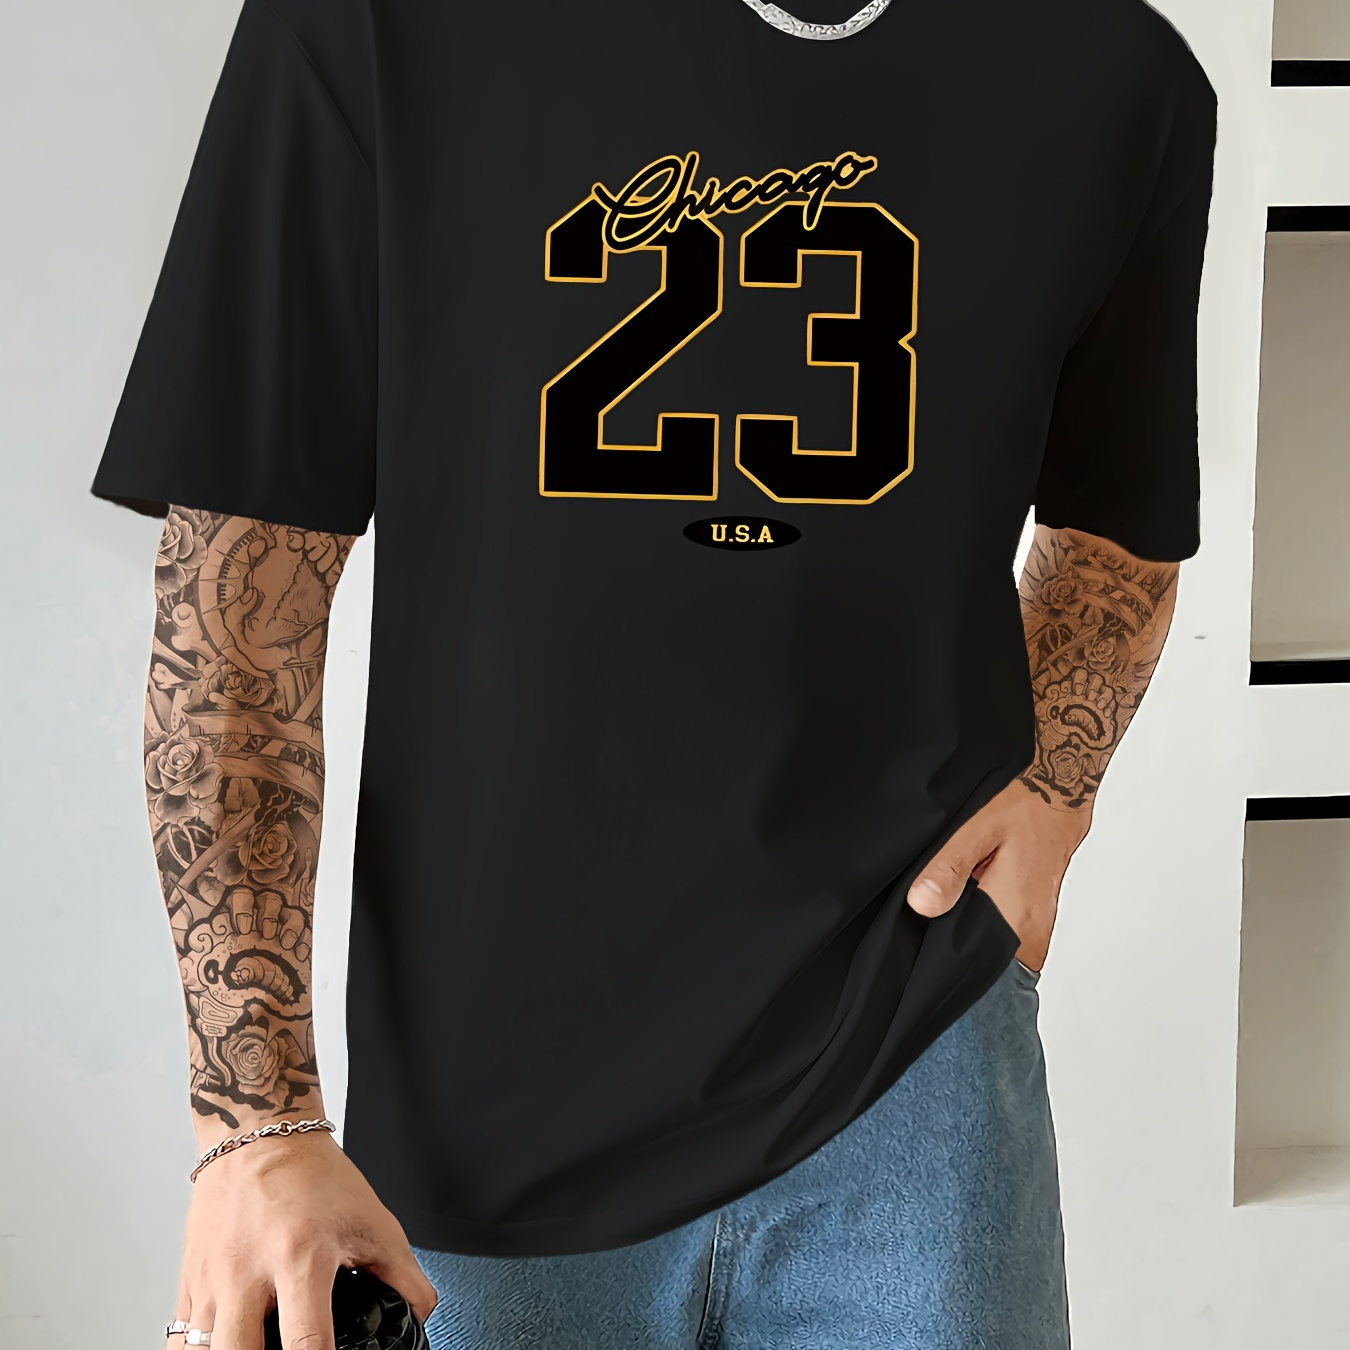 

Chicago 23 Print T Shirt, Tees For Men, Casual Short Sleeve T-shirt For Summer